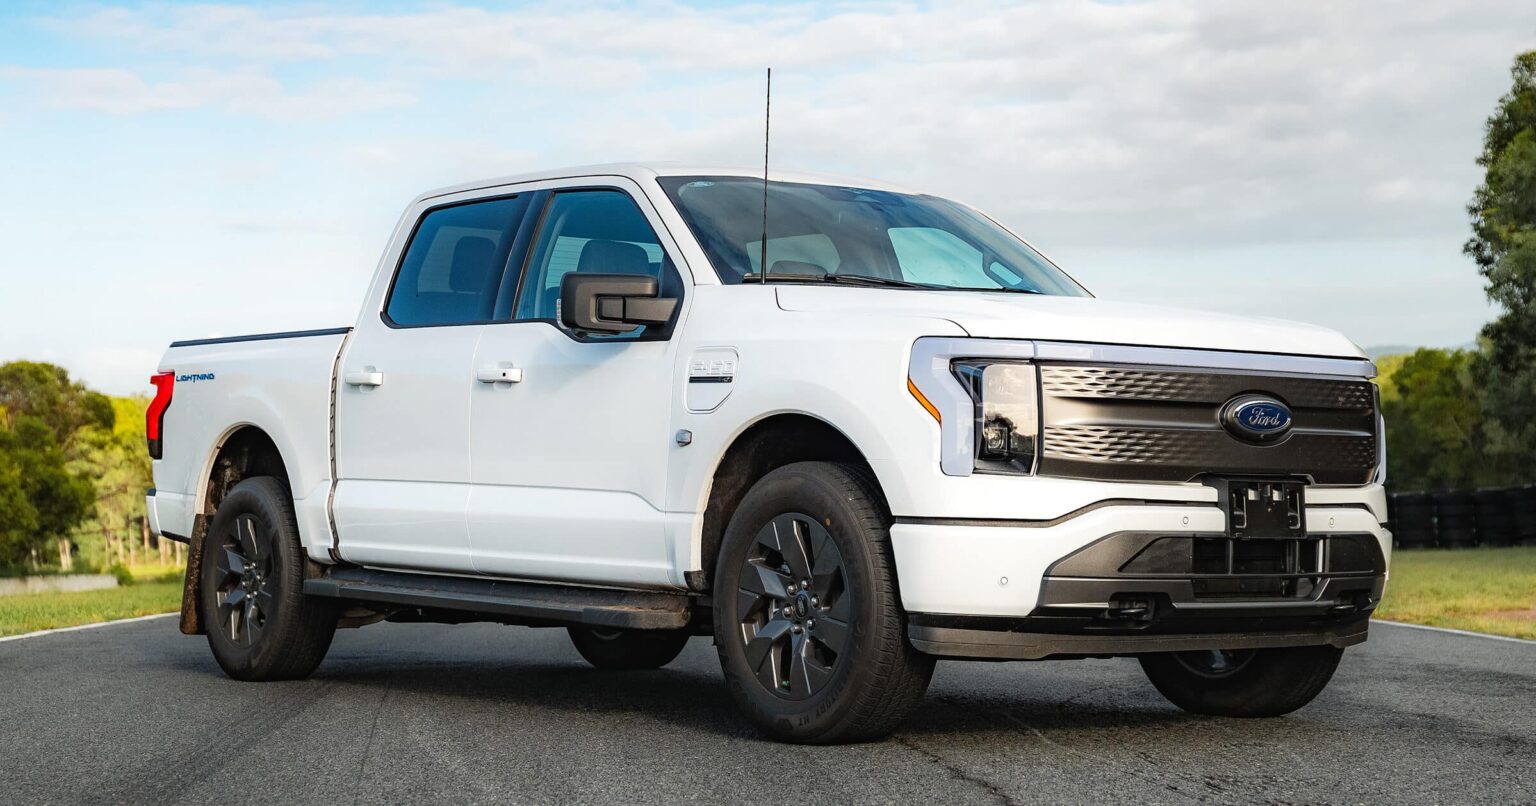 AUSEV - A white F-150 Lightning electric truck parked on a road, showcasing its sleek modern design and distinctive blue Ford logo on the grille.